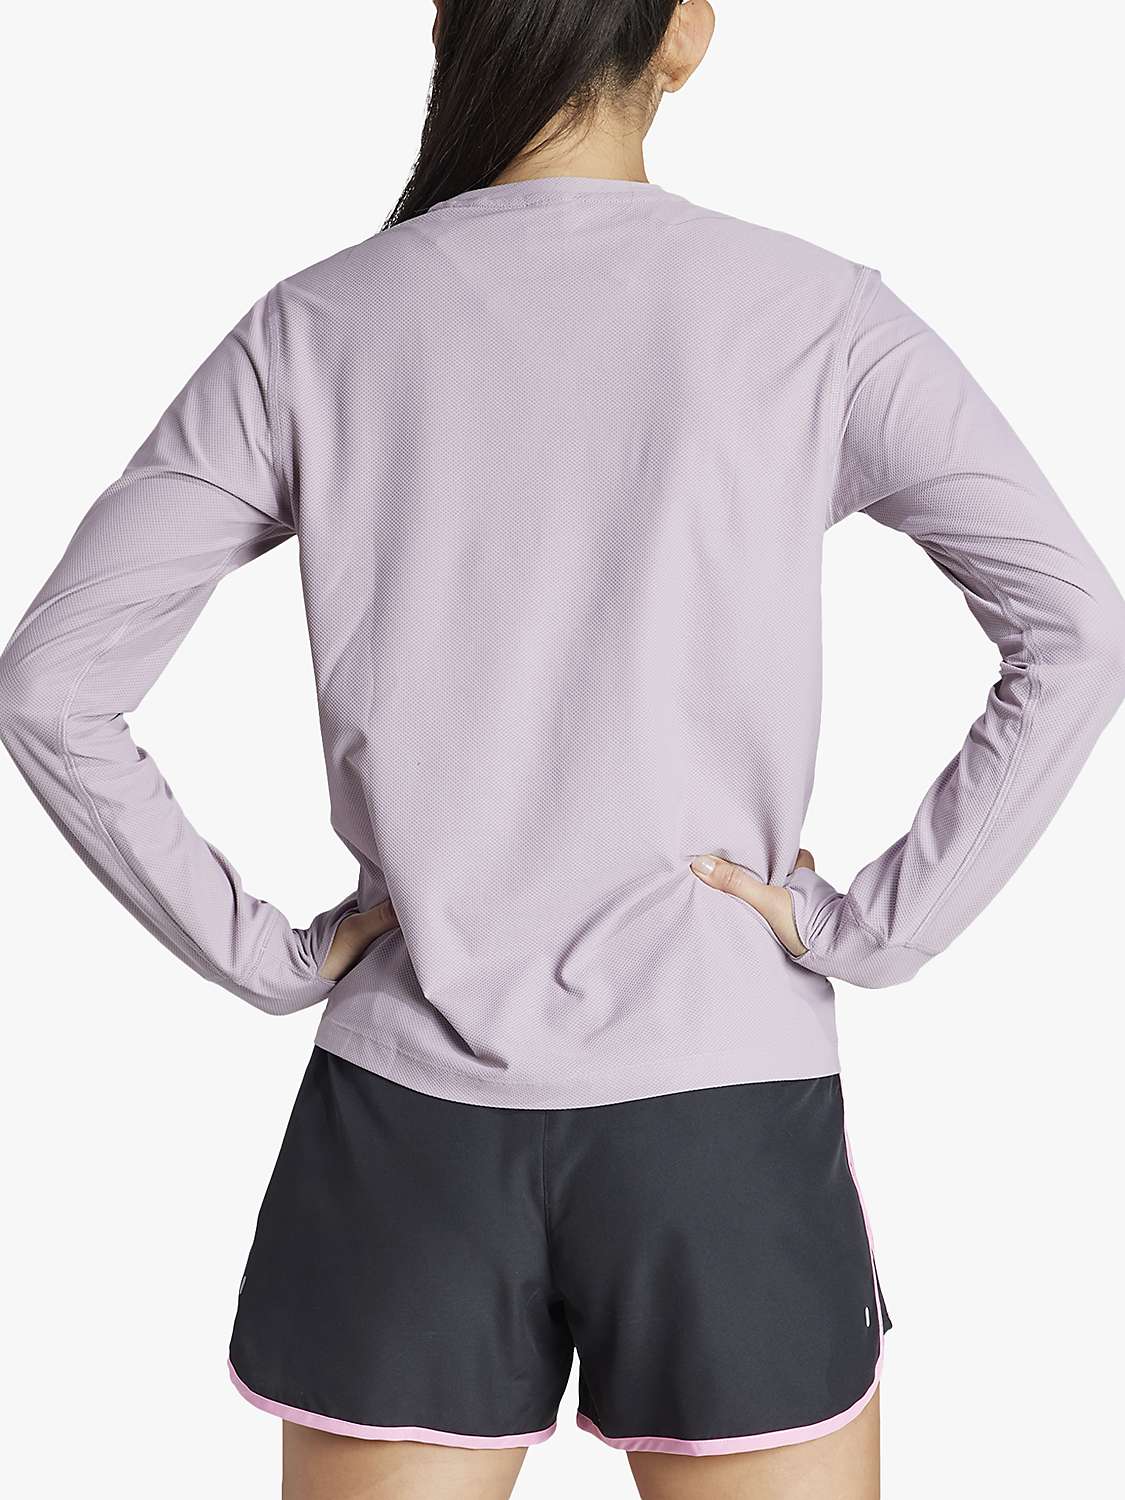 Buy adidas Own The Run Long Sleeve Recycled Running Top Online at johnlewis.com